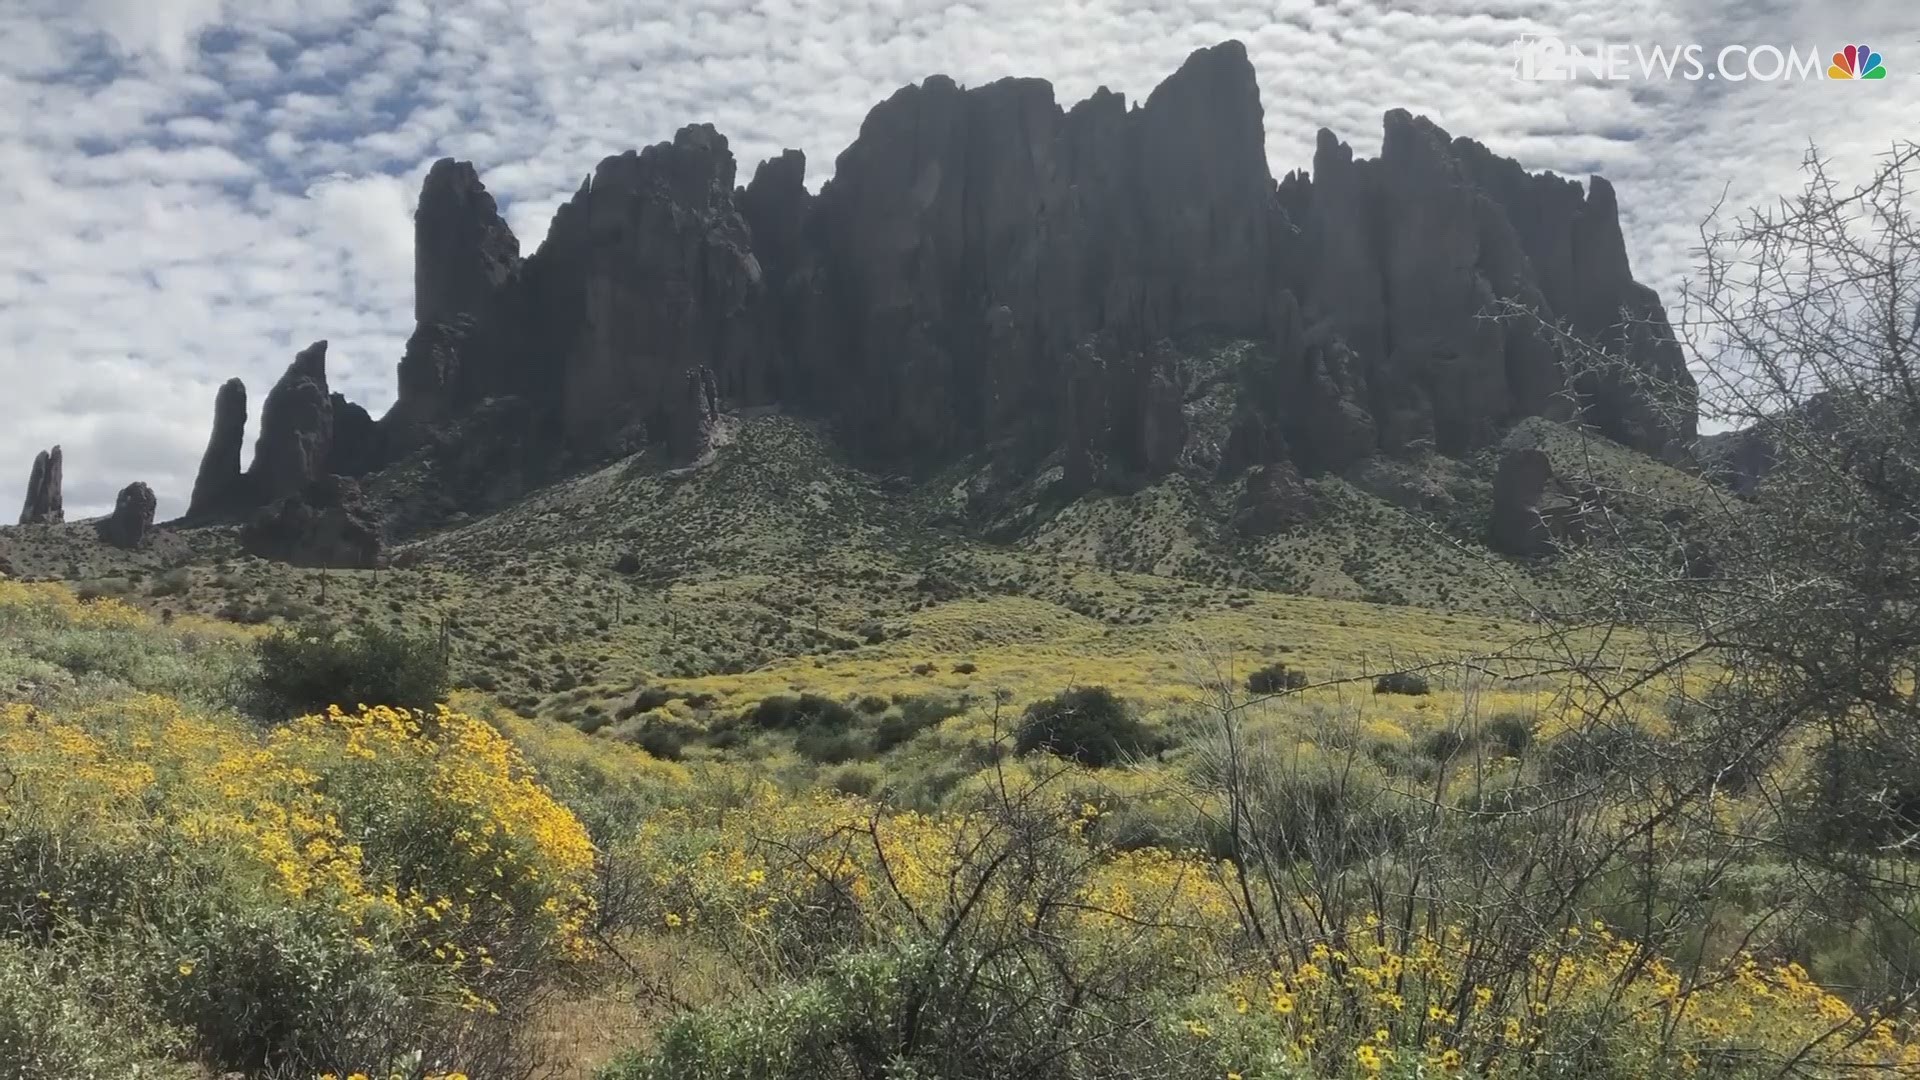 Spring has sprun! So, we thought it would be nice to share the beautiful view of the wildflowers that have popped up at Lost Dutchman Park in Apache Junction.